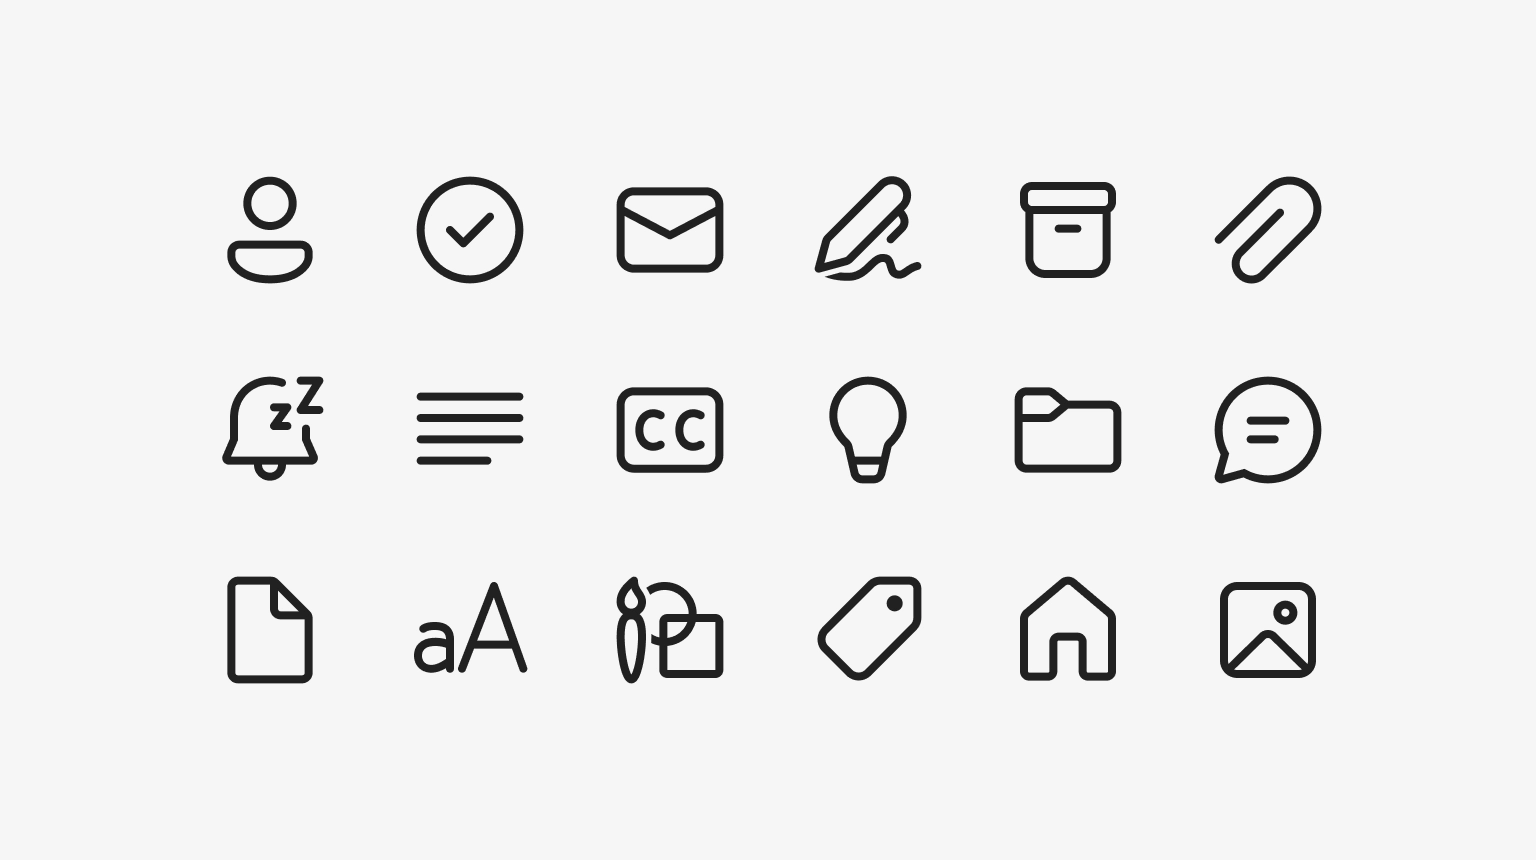 System icons overview